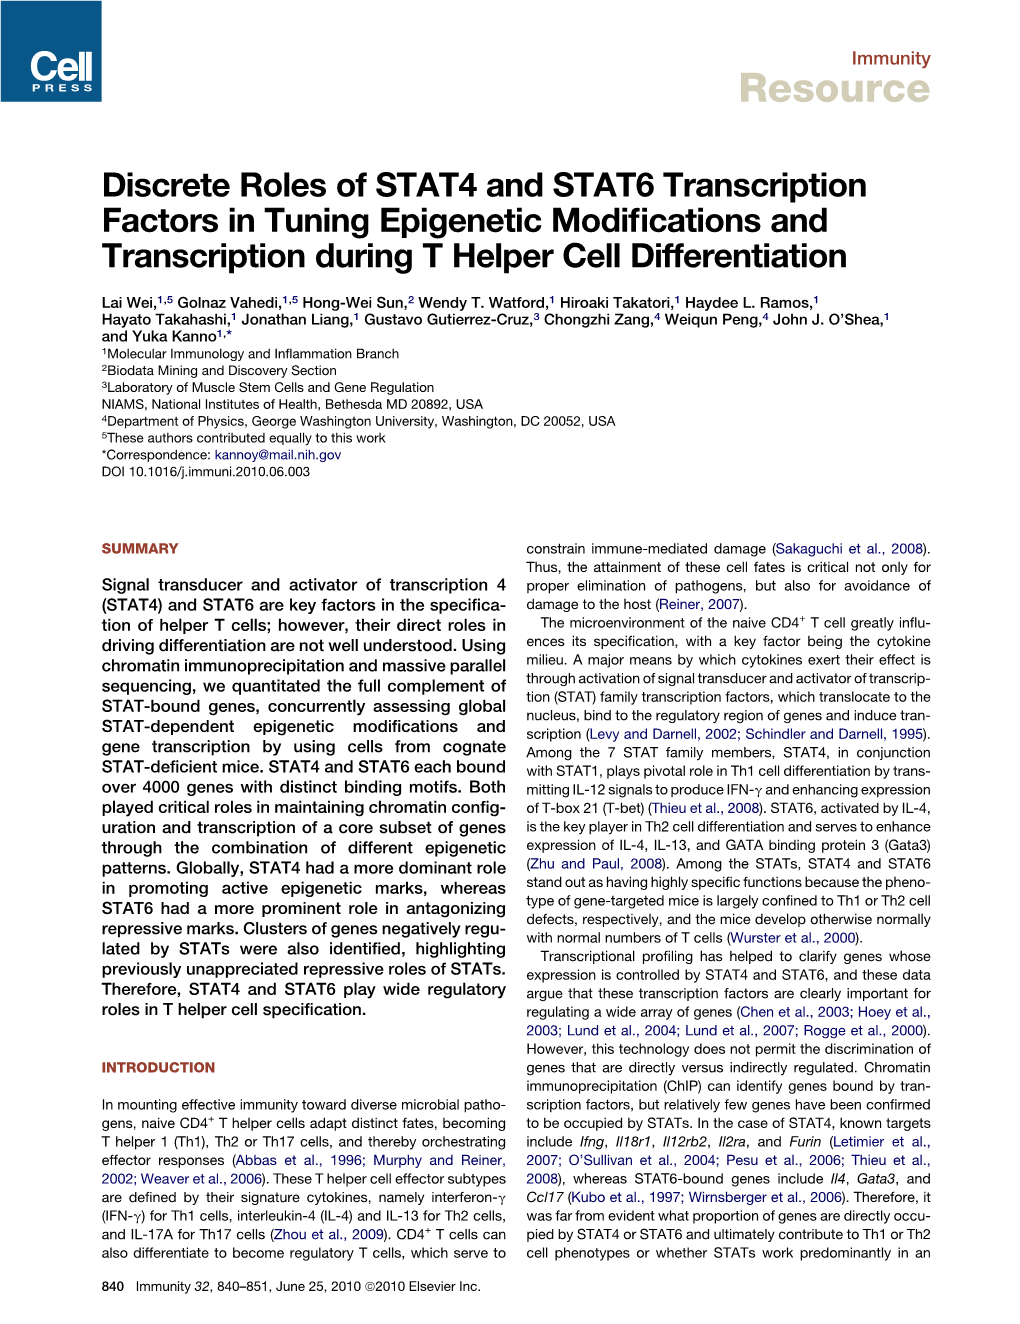 Discrete Roles of STAT4 and STAT6 Transcription Factors in Tuning Epigenetic Modiﬁcations and Transcription During T Helper Cell Differentiation